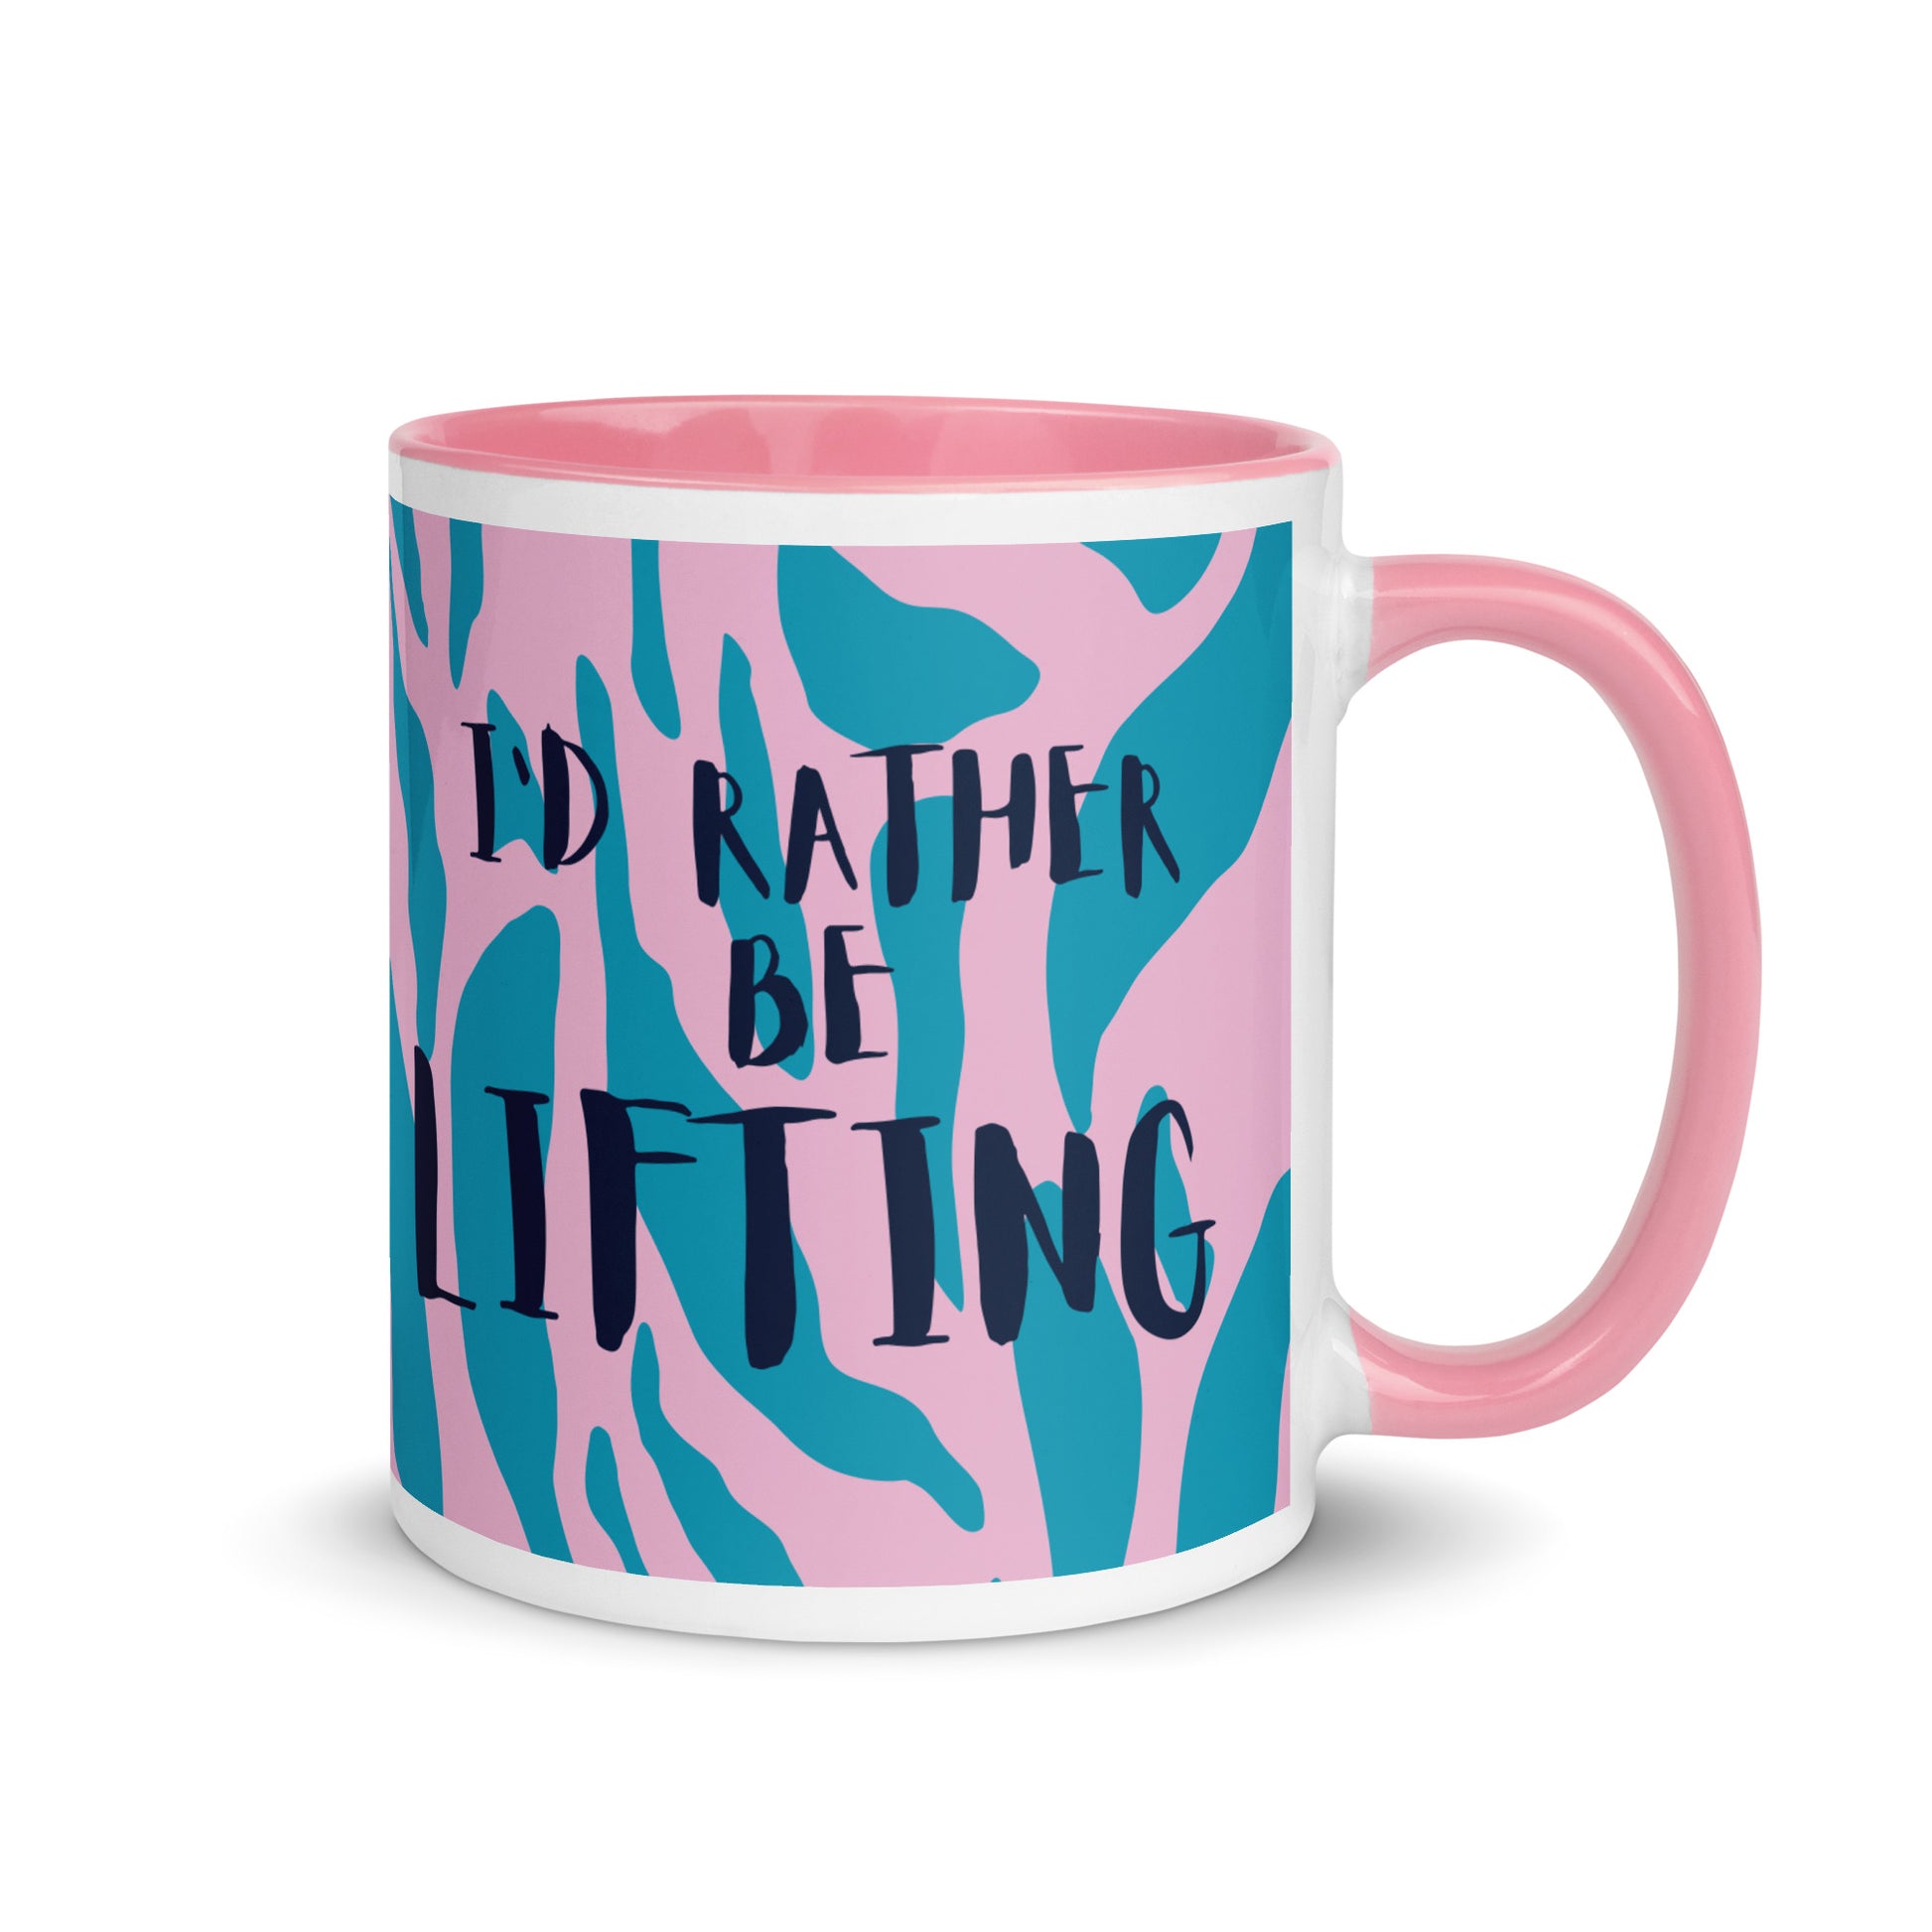 Pink handled mug with I'd rather be lifting written across a blue and pink animal print background. A gift for people who love the gym